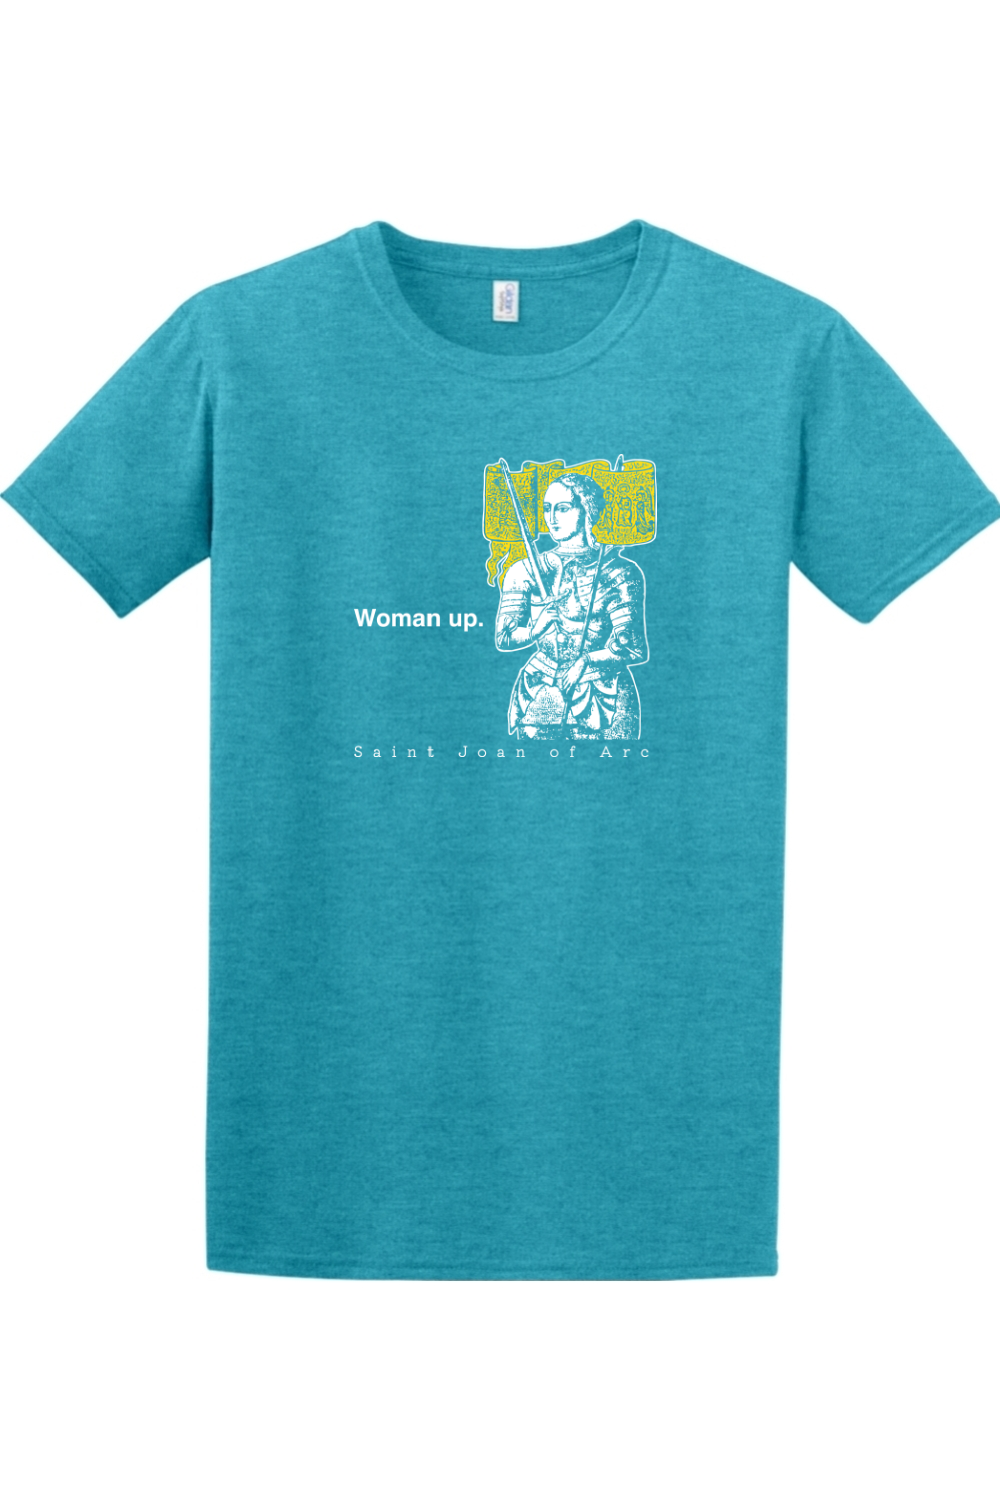 Woman Up - St. Joan of Arc Adult T-Shirt